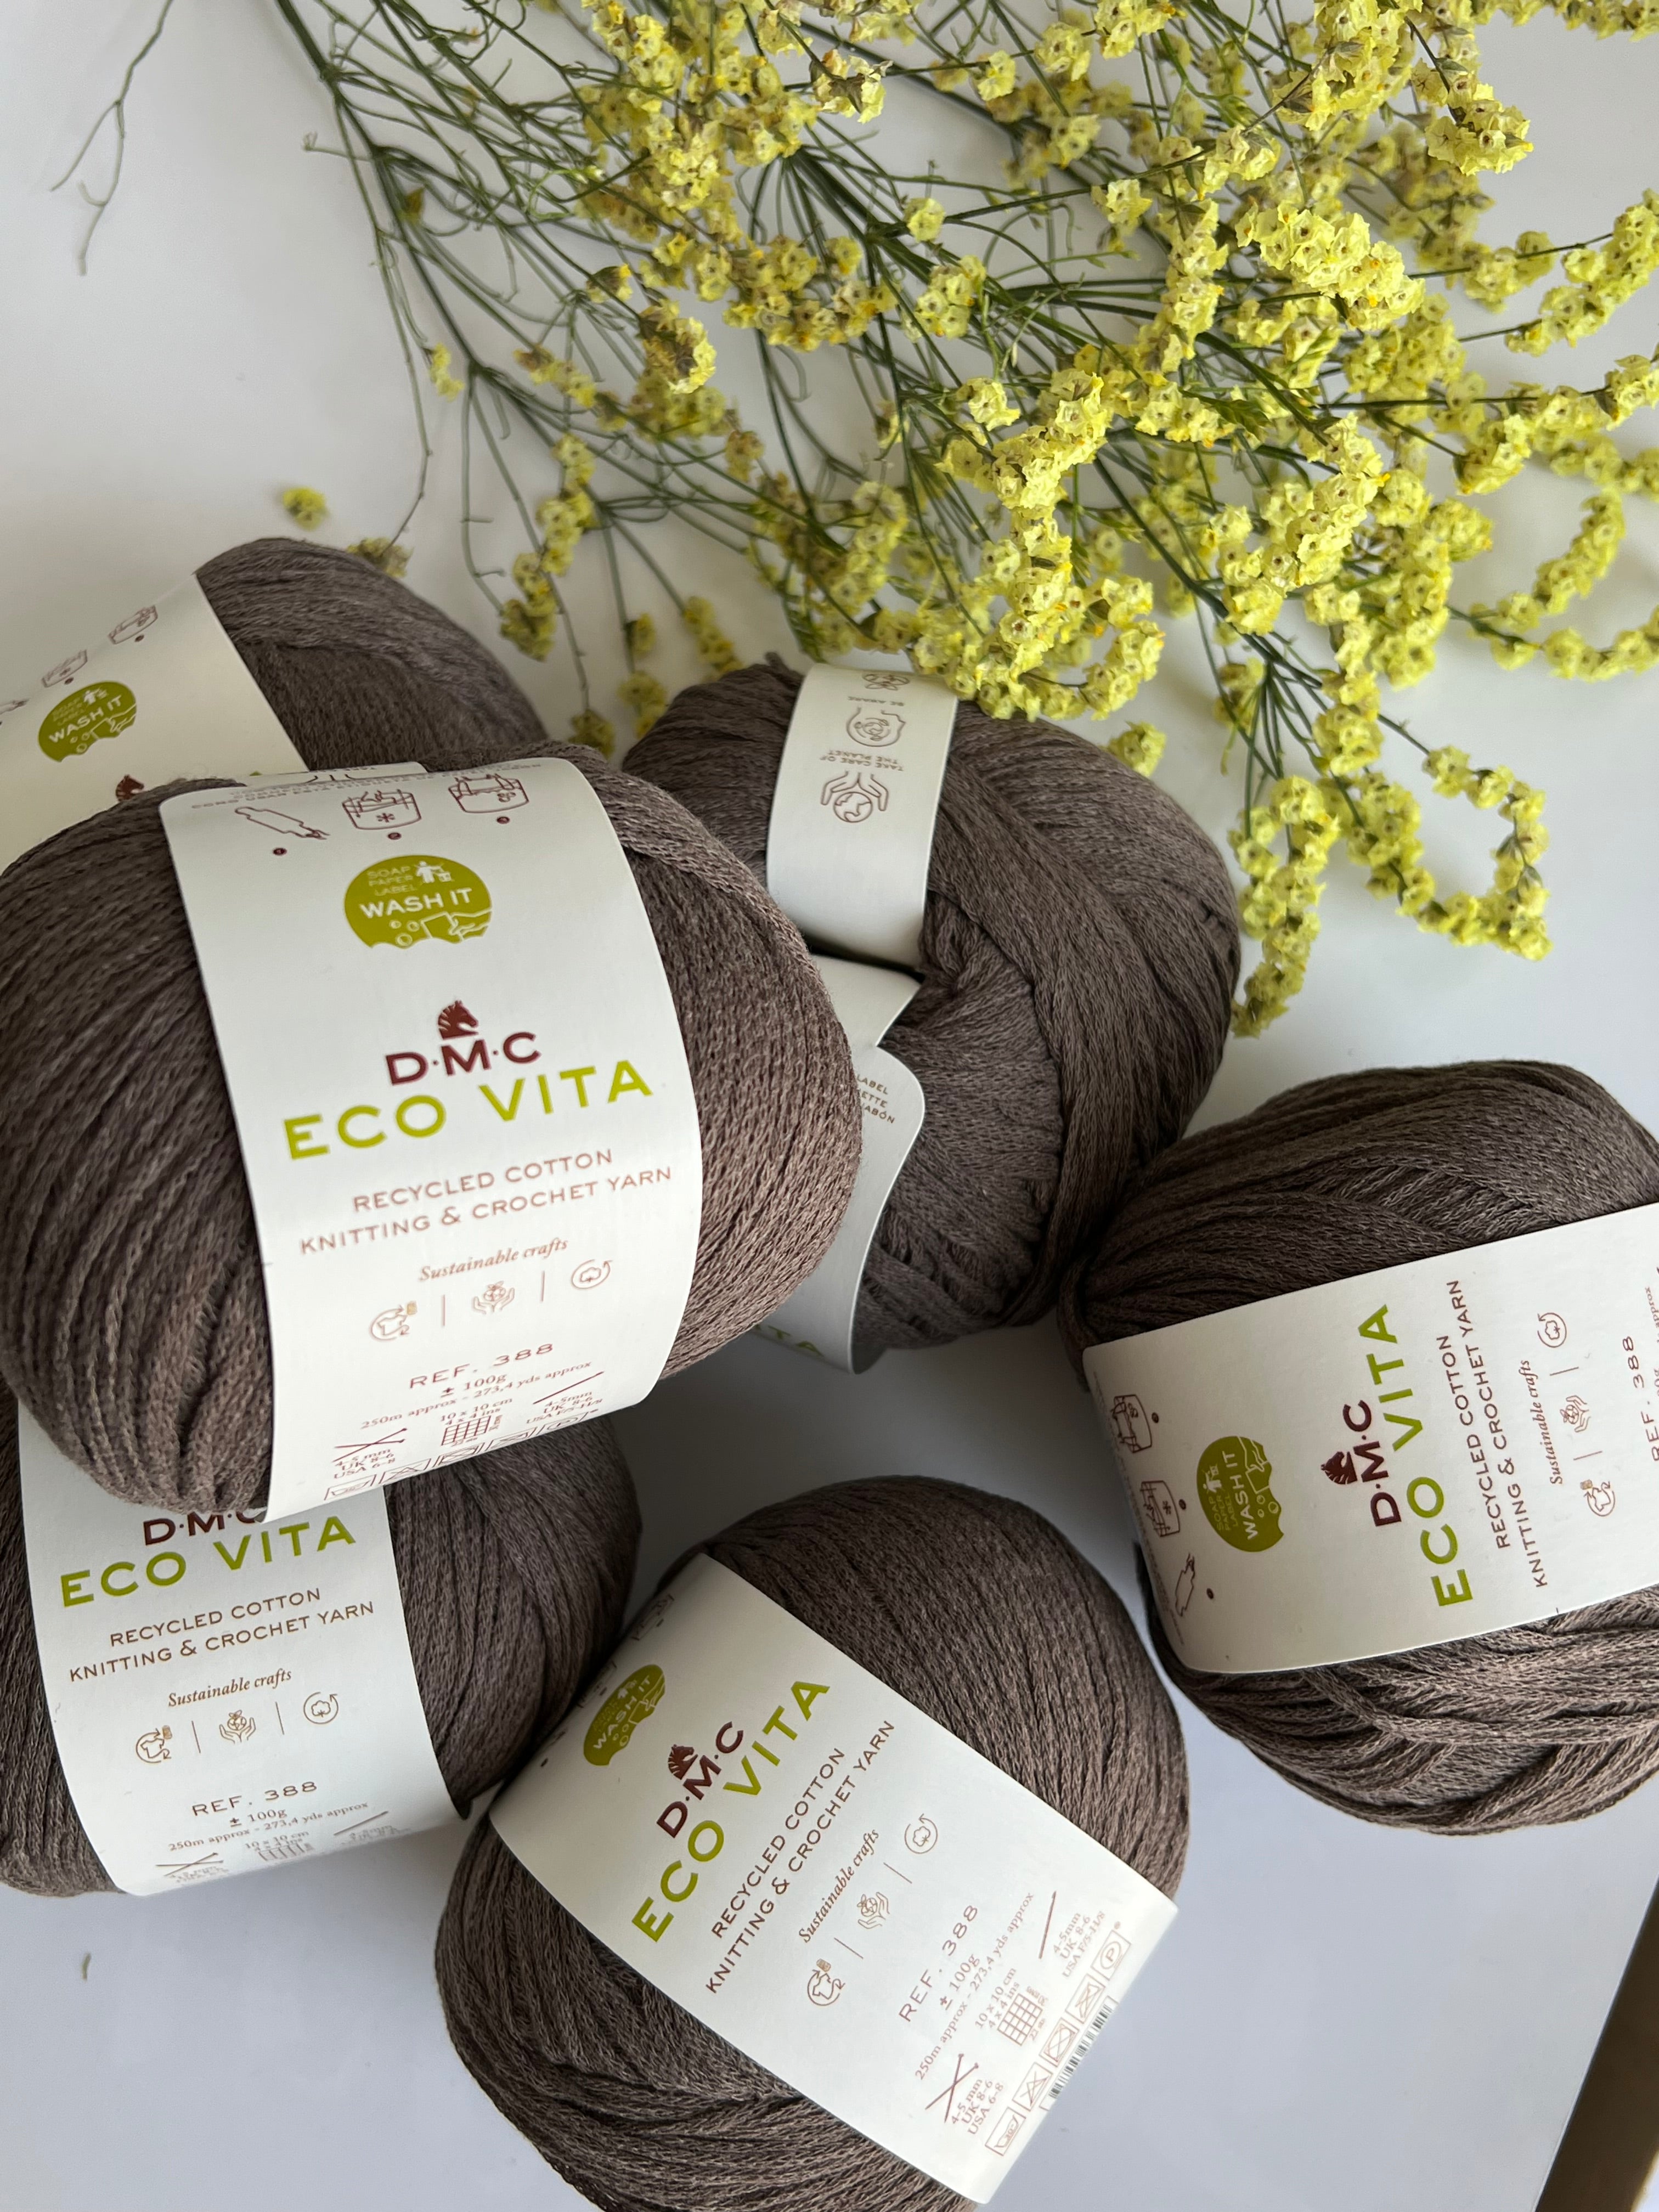 DMC Eco Vita Recycled Cotton Yarn. Wide Variety of Colors Inspired by Nature